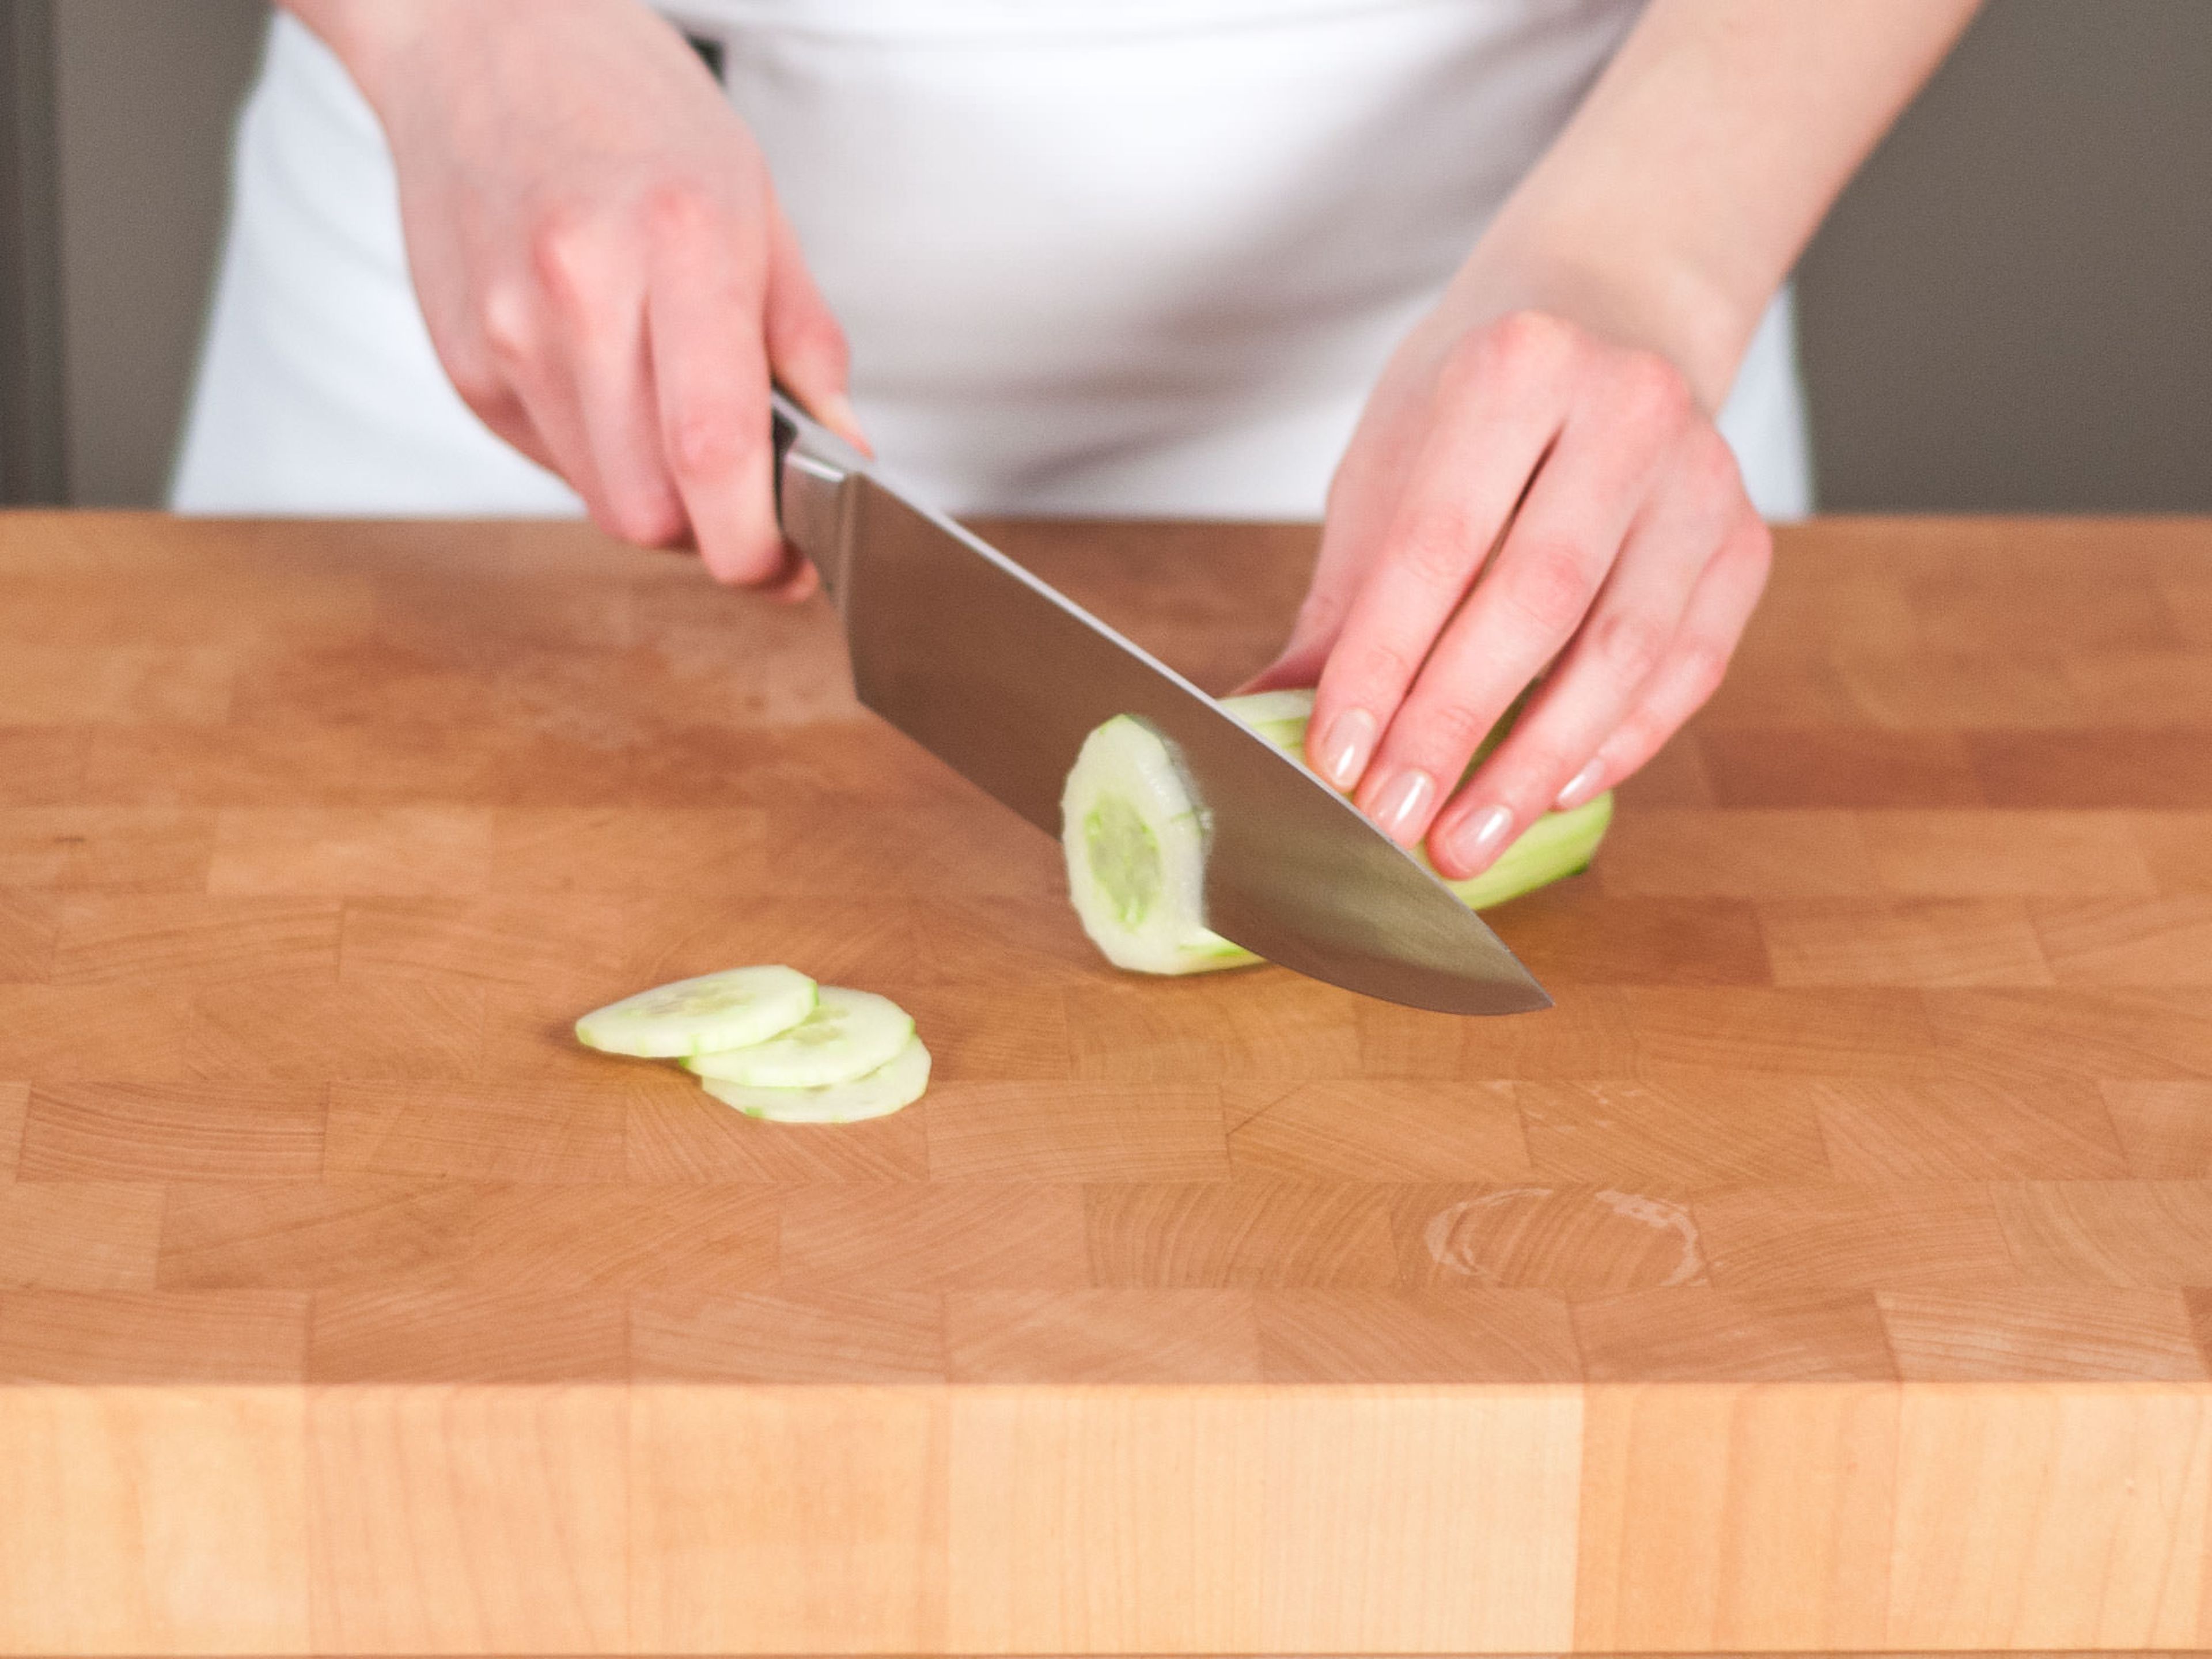 Peel cucumber, and cut crosswise into thin ring-shaped slices.